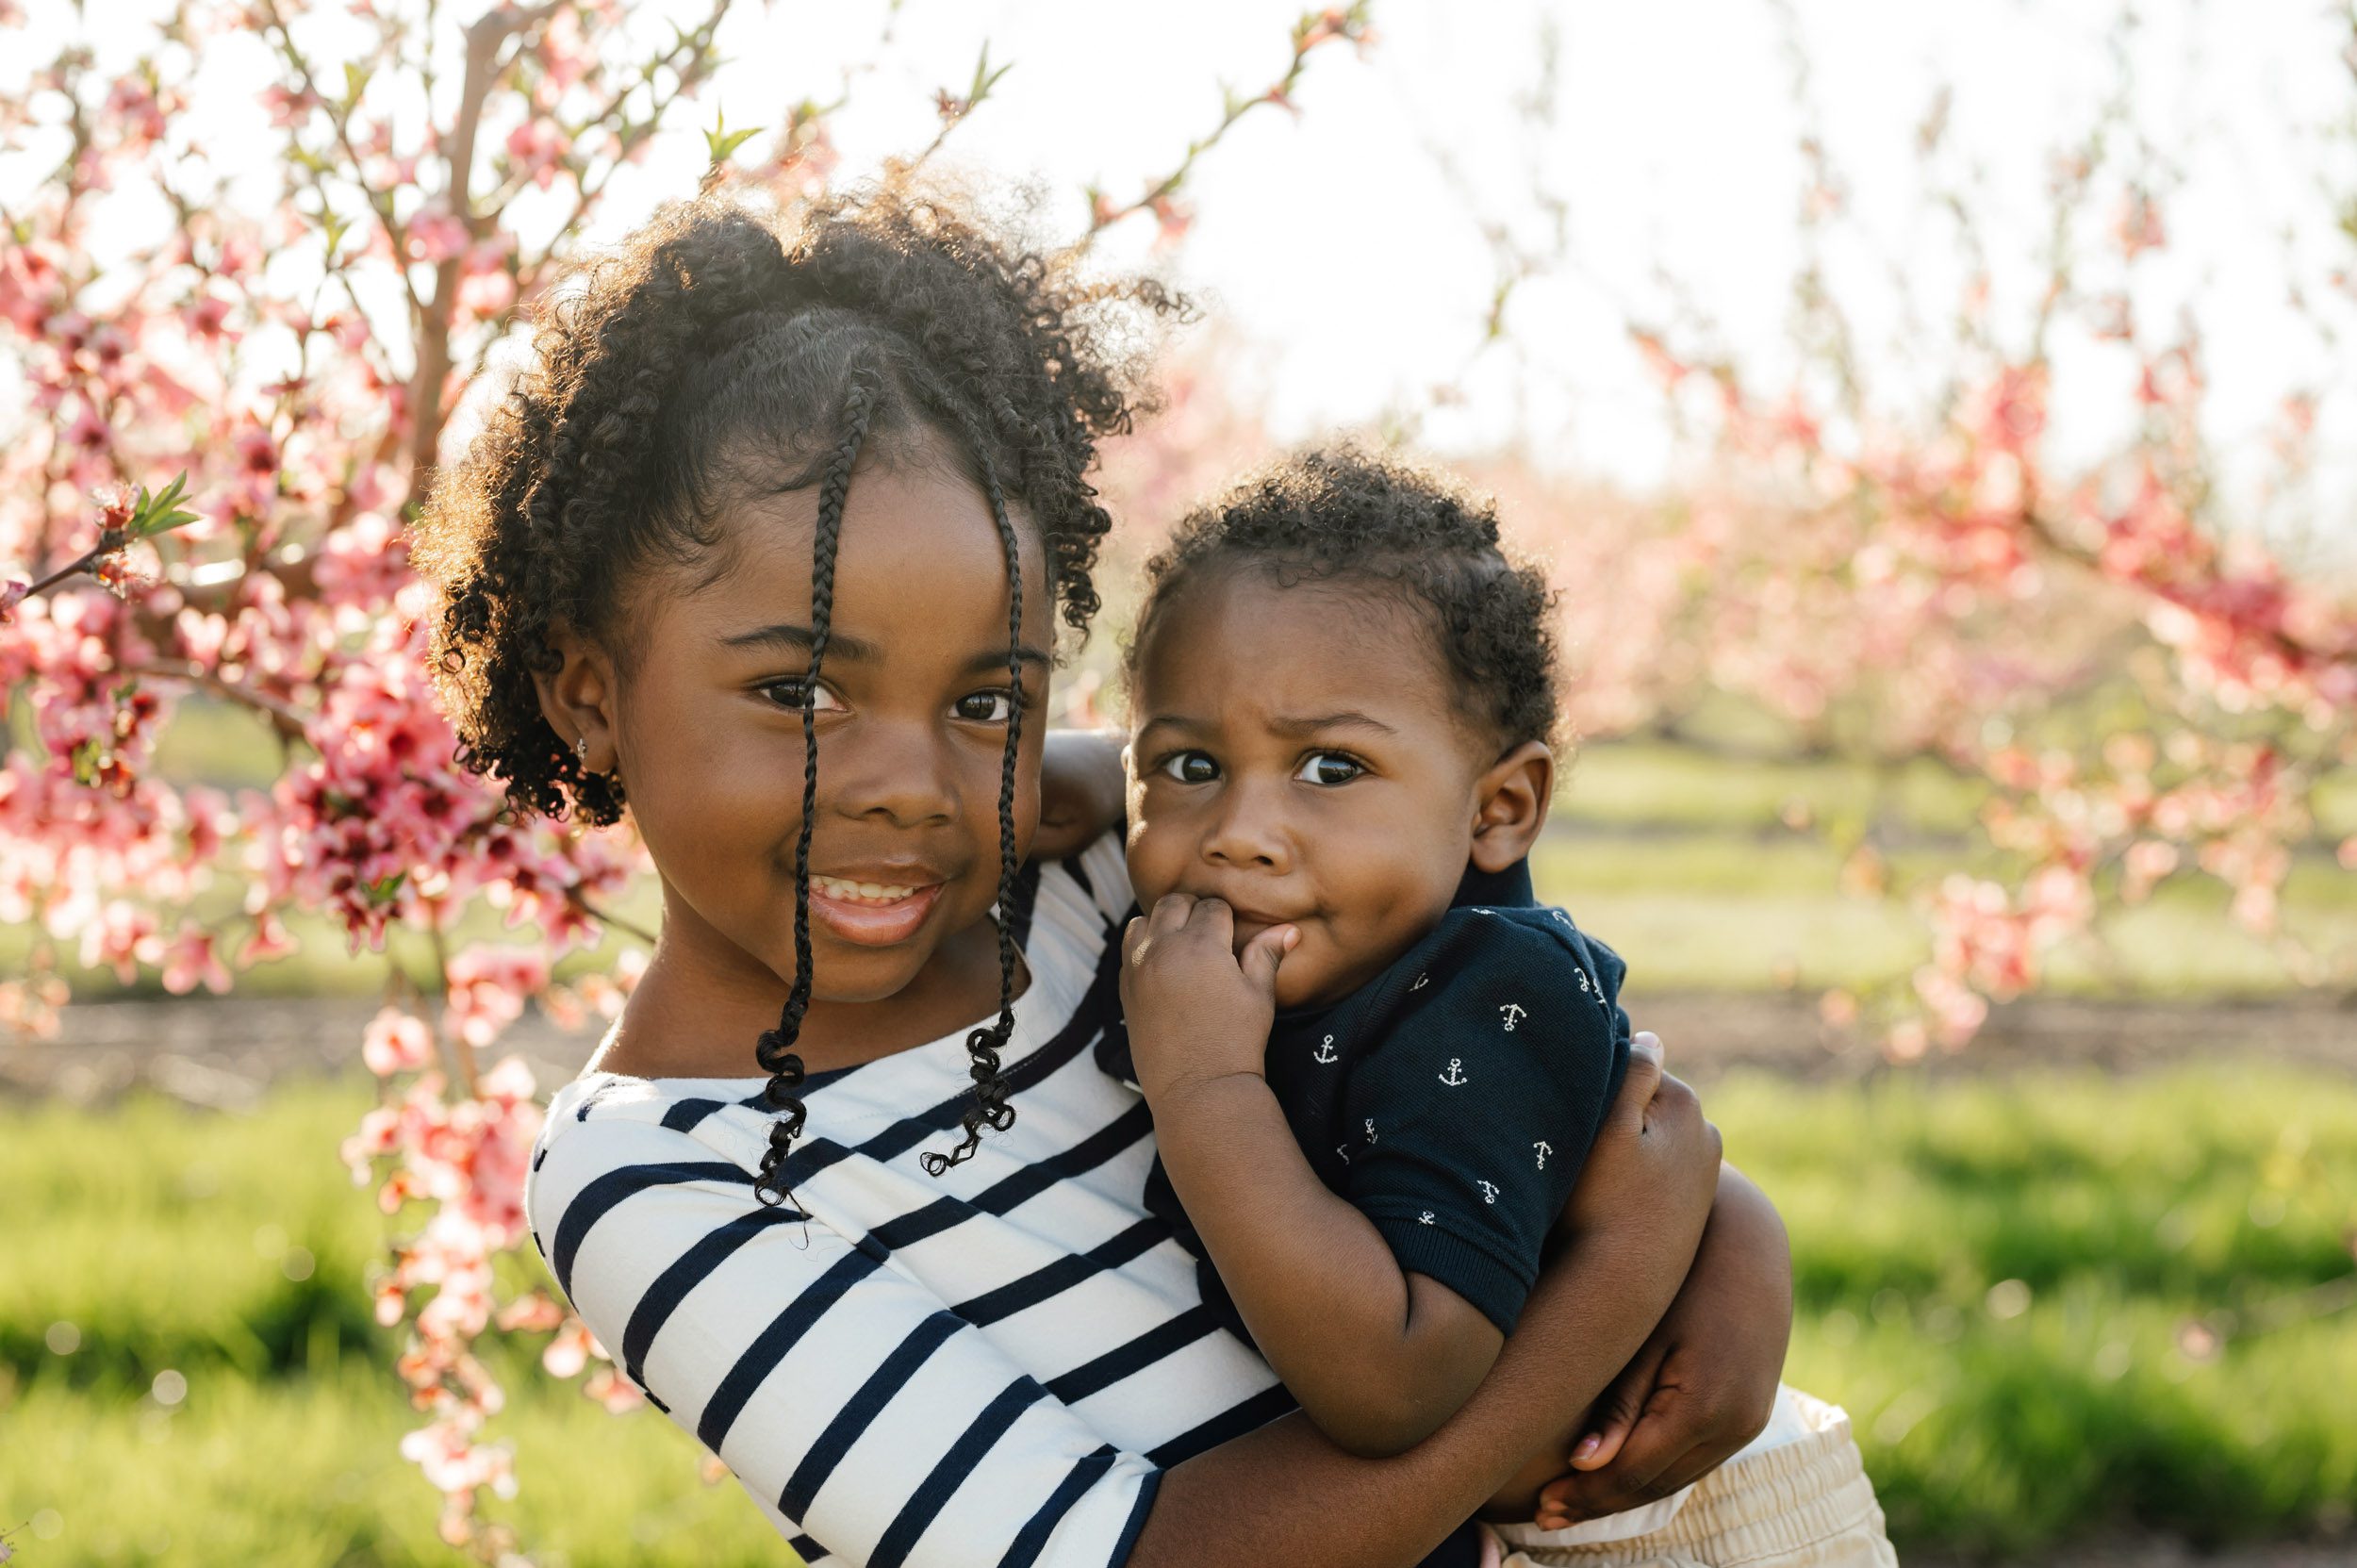 a girl holding her little brother in her arms as they both look at the camera and smile during a mini session in an orchard full of pink peach blossoms in bloom